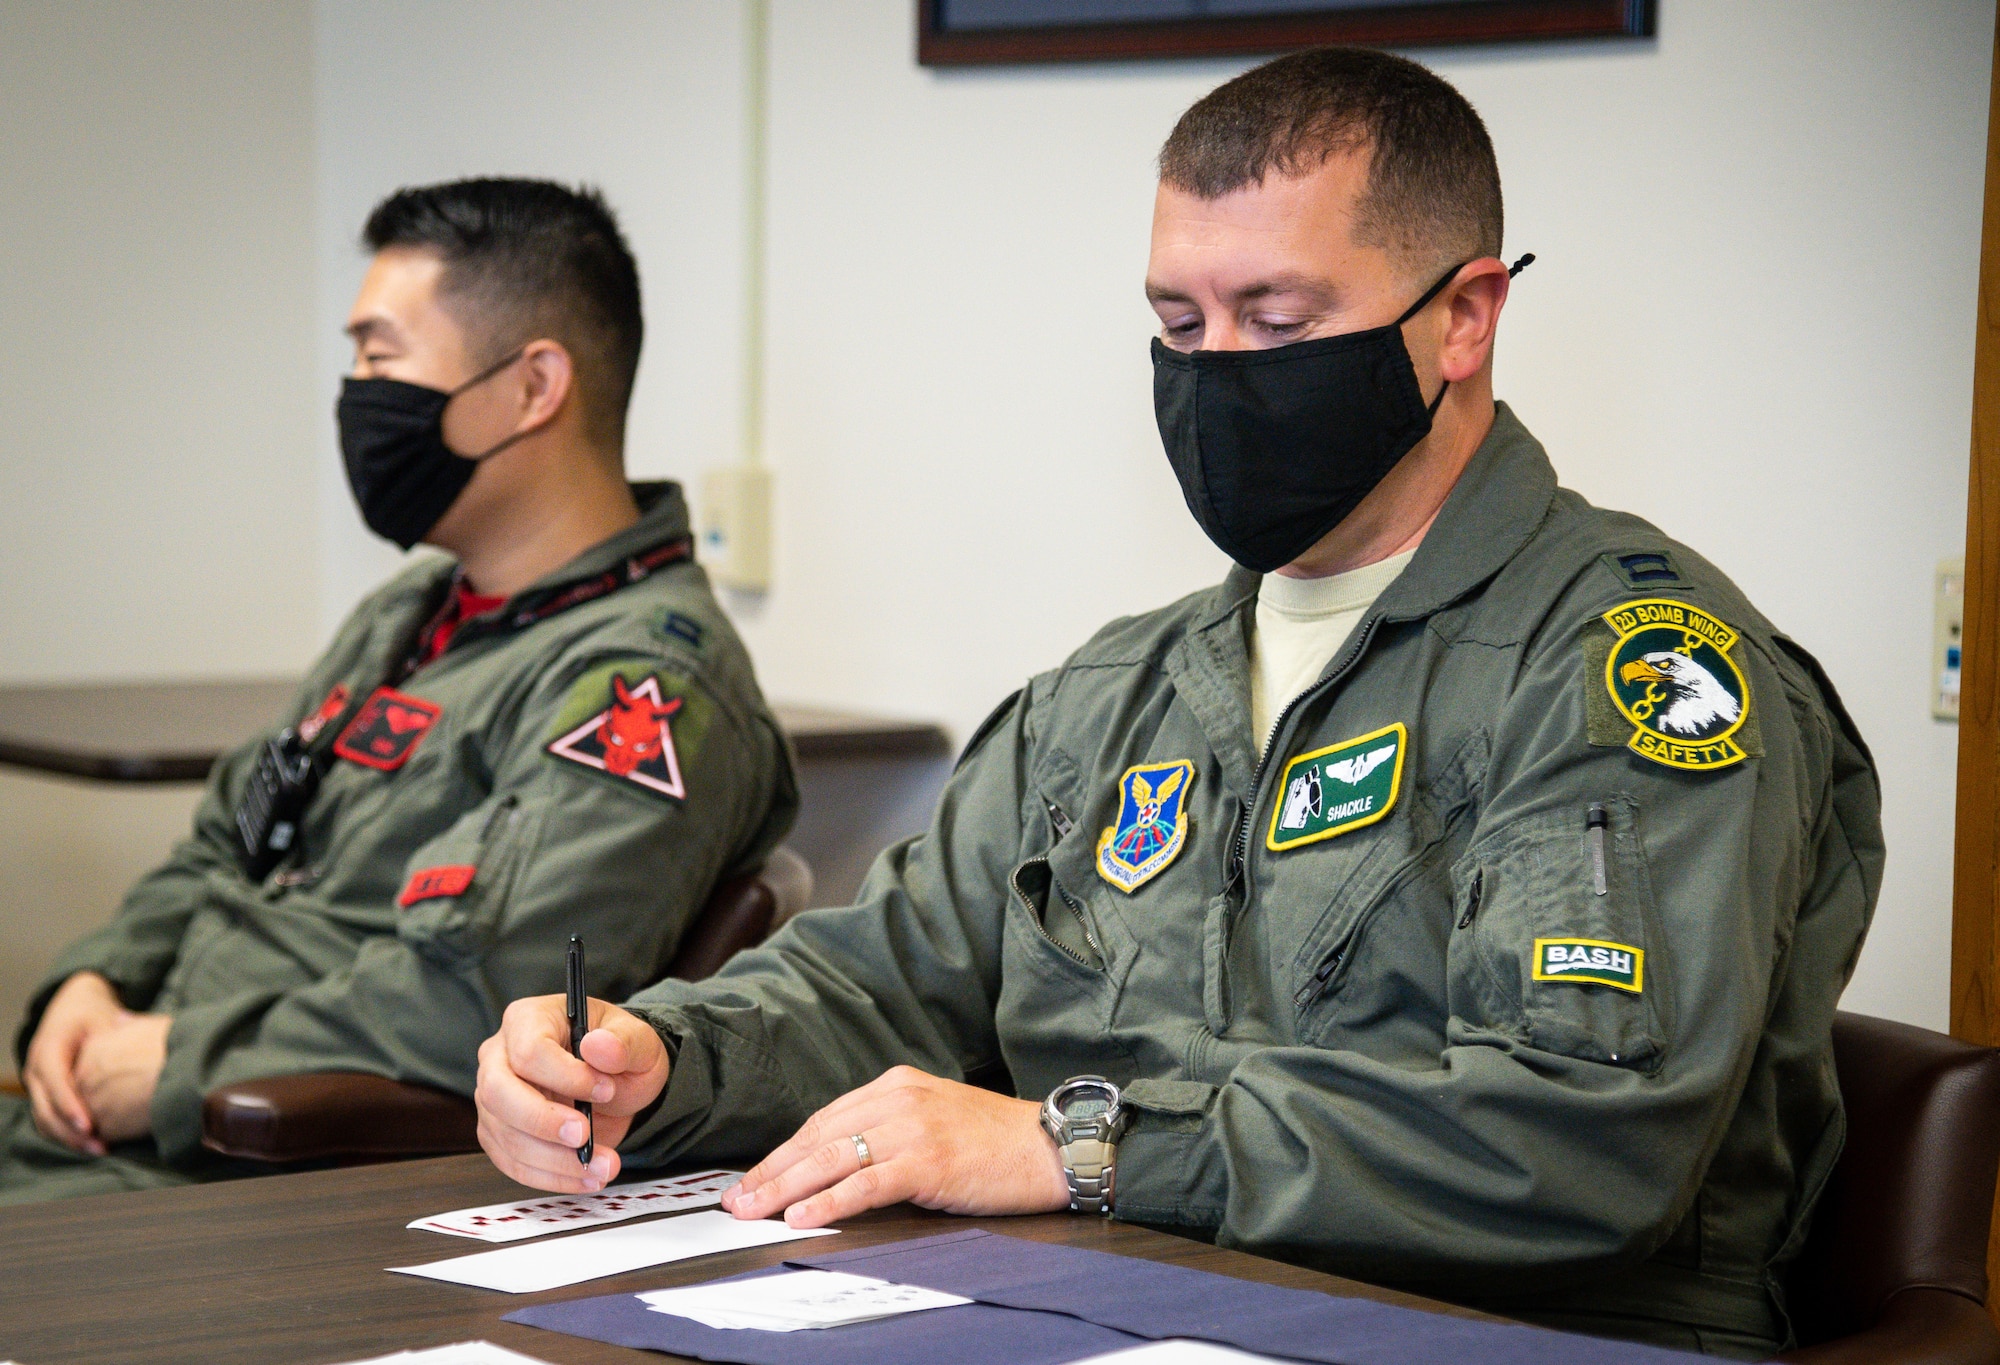 Capt. Dustin Martin, 2nd Bomb Wing weapons systems officer instructor, grades tests in preparation for Global Thunder 21 at Barksdale Air Force Base, La., Oct. 23, 2020. U.S. Strategic Command’s fundamental mission is to deter, detect and prevent strategic attack against the United States, our allies and partners. (U.S. Air Force photo by Senior Airman Lillian Miller)